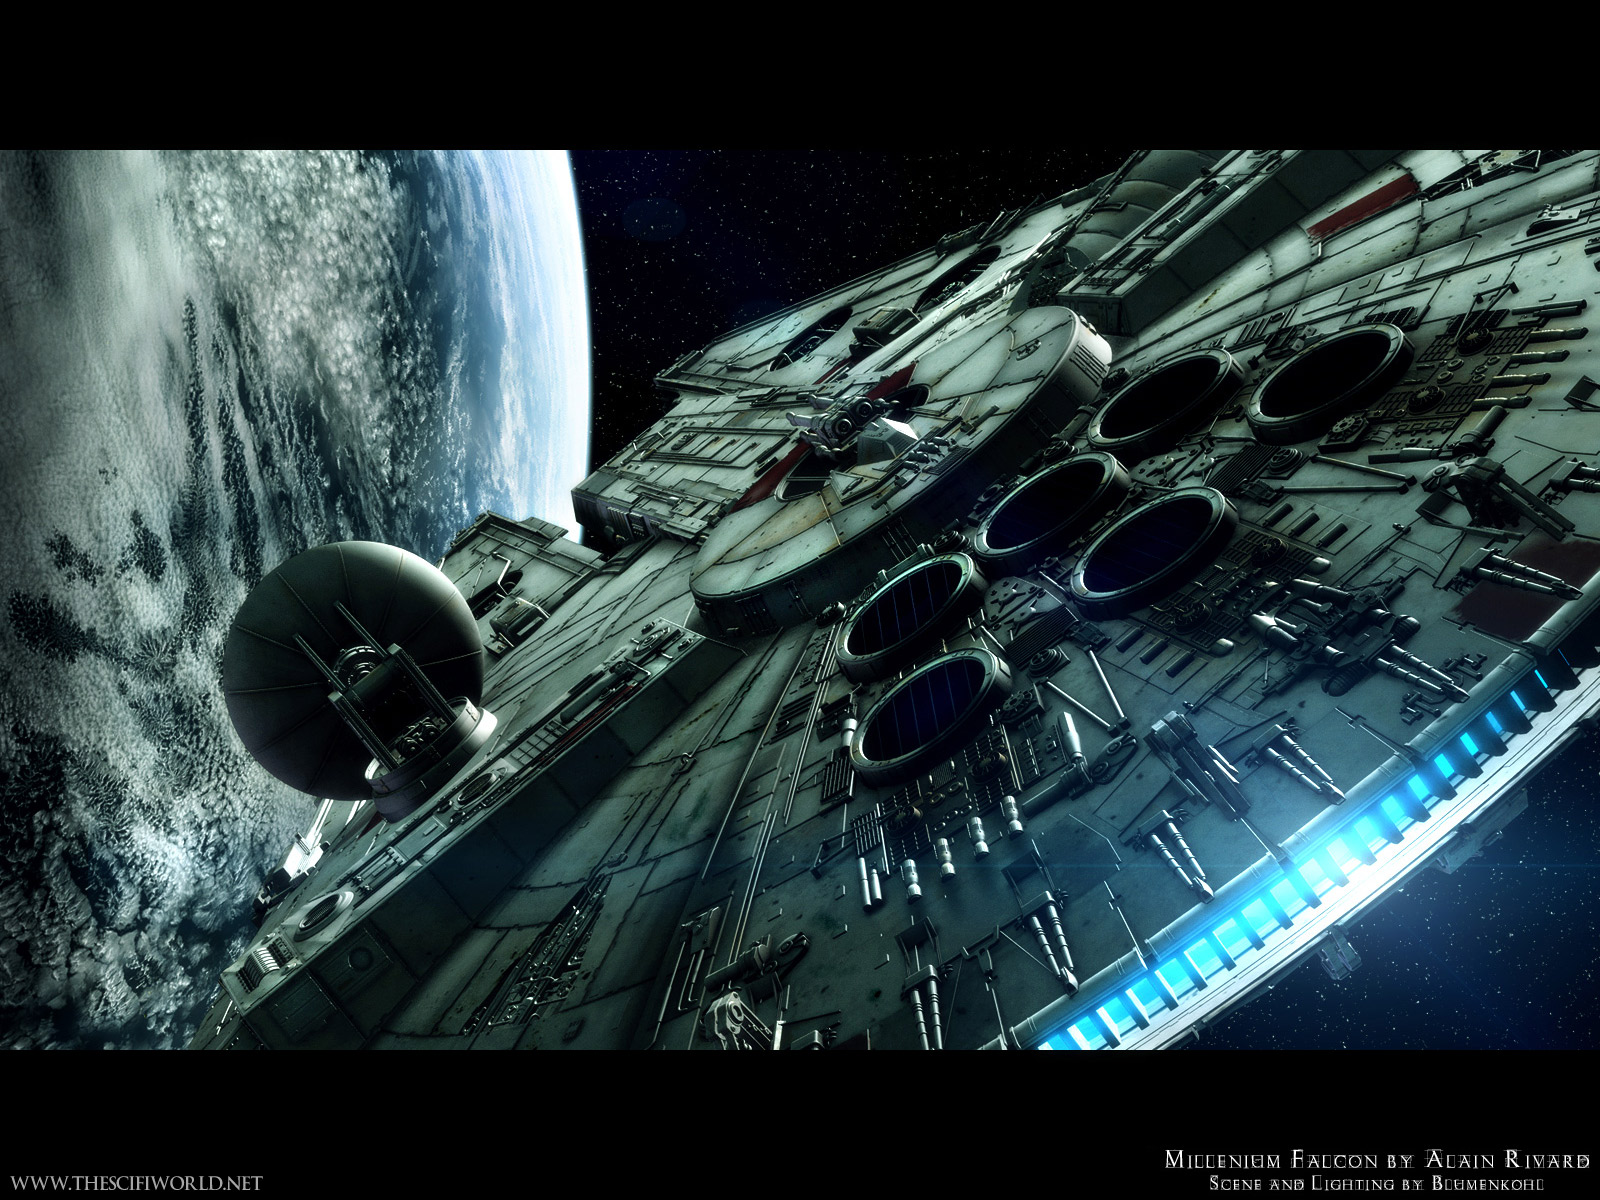 collection of cool desktop wallpaper pictures for Star Wars fans